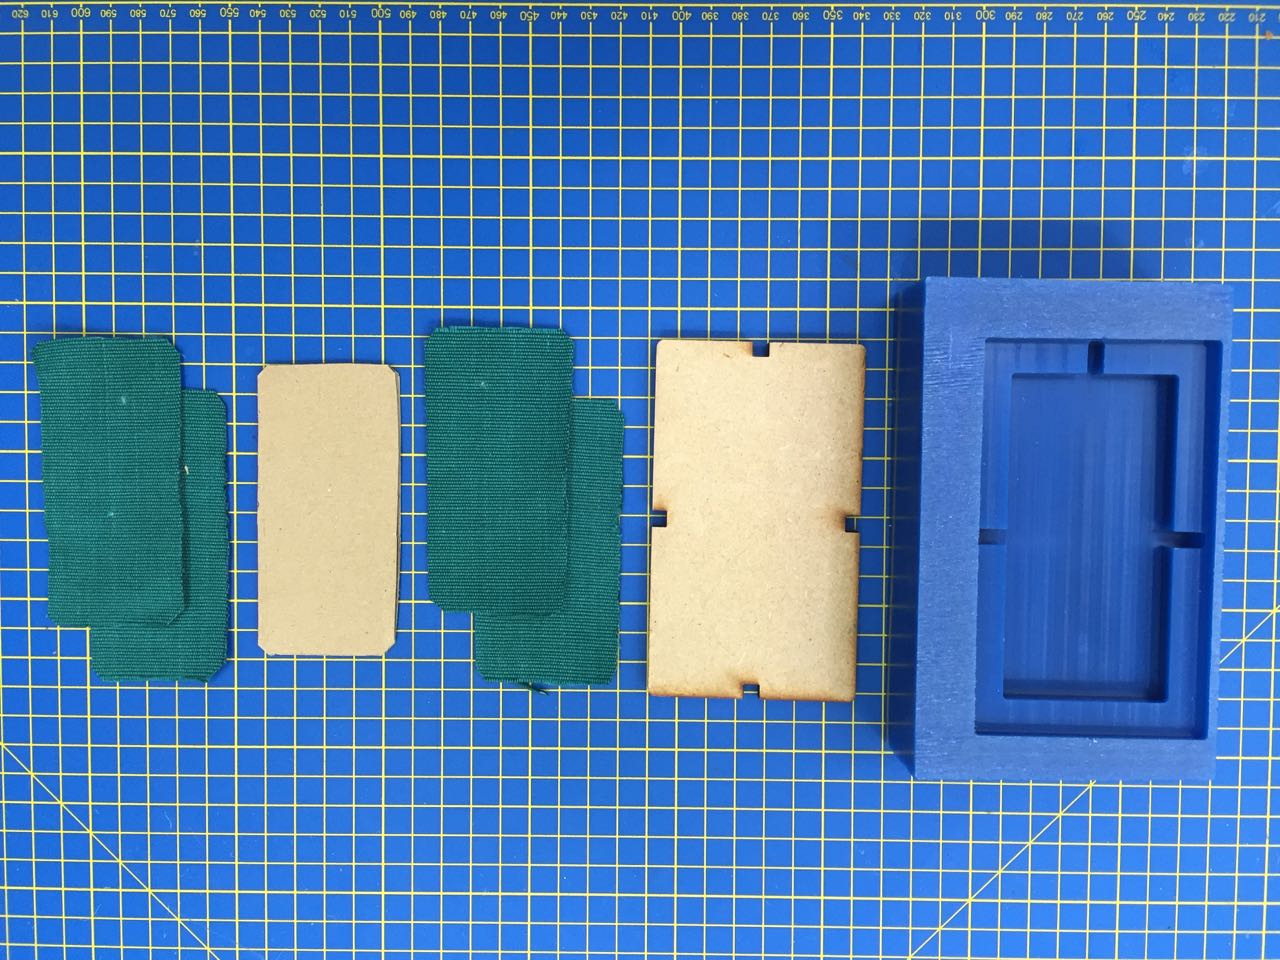 Mold and material parts